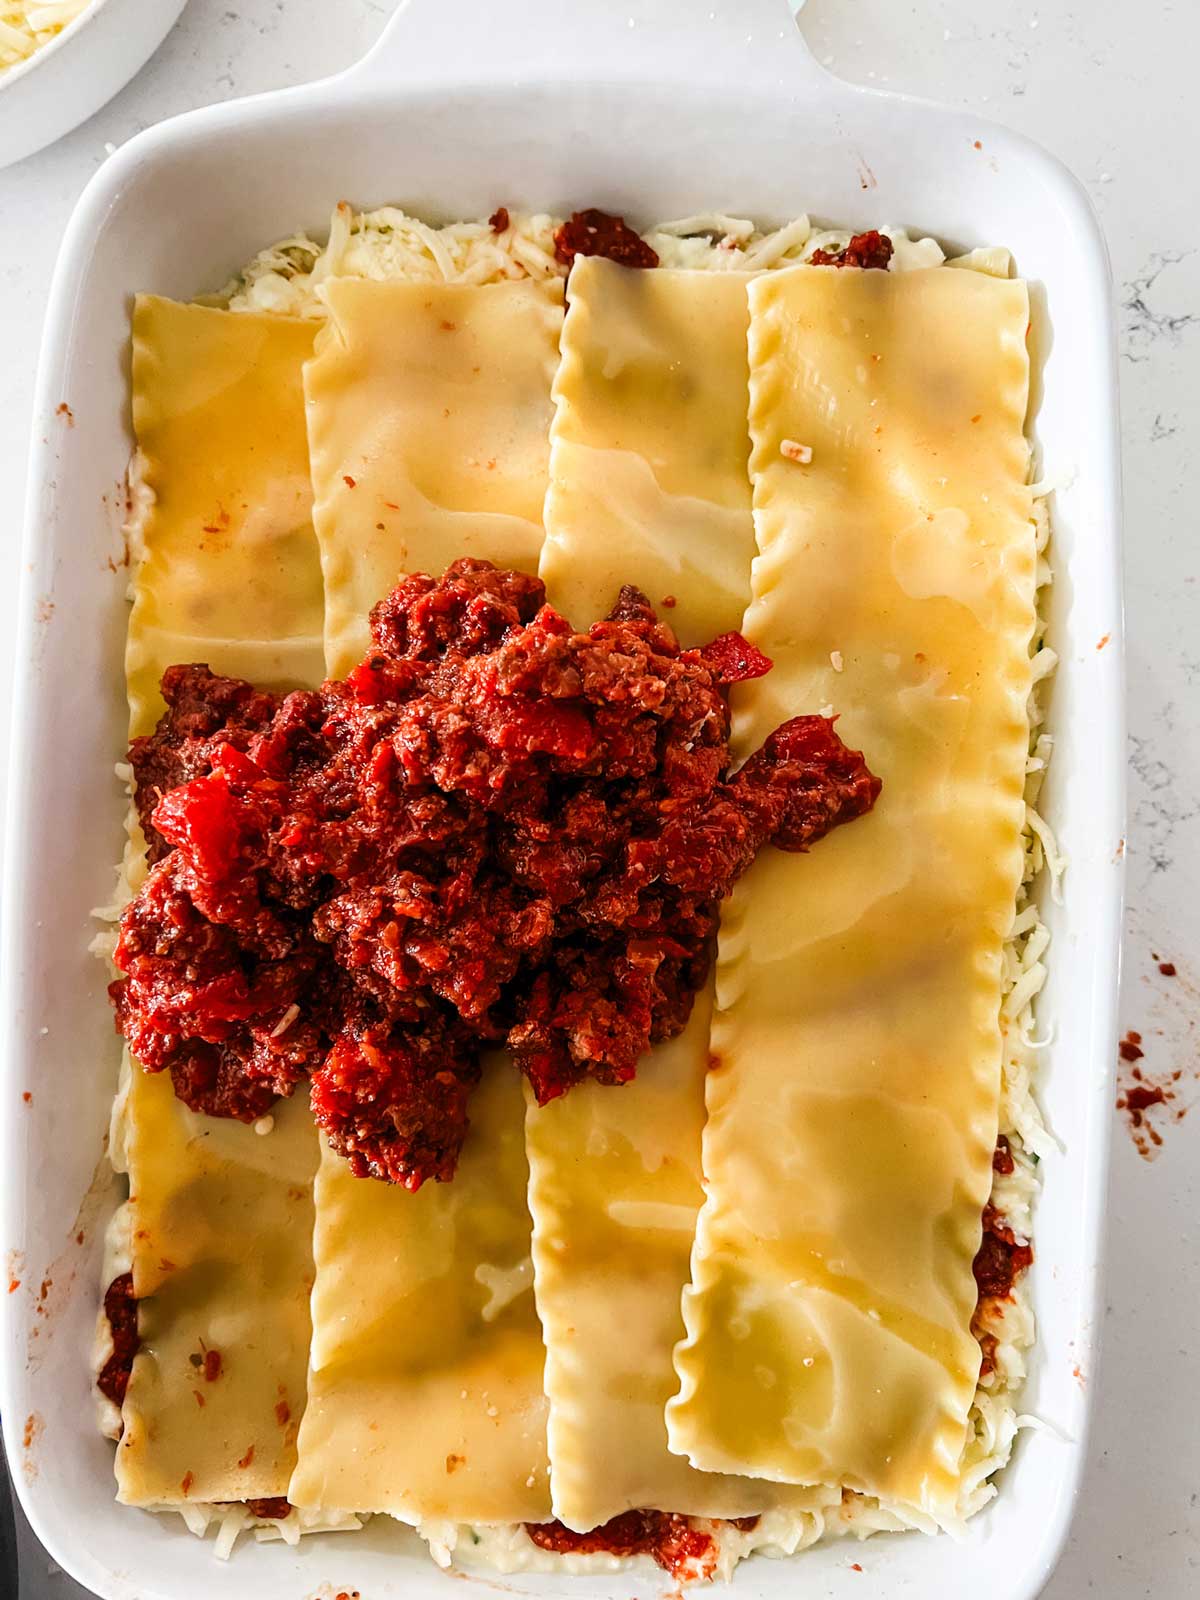 Meat sauce being added on top of lasagna noodles as one of the final layers.